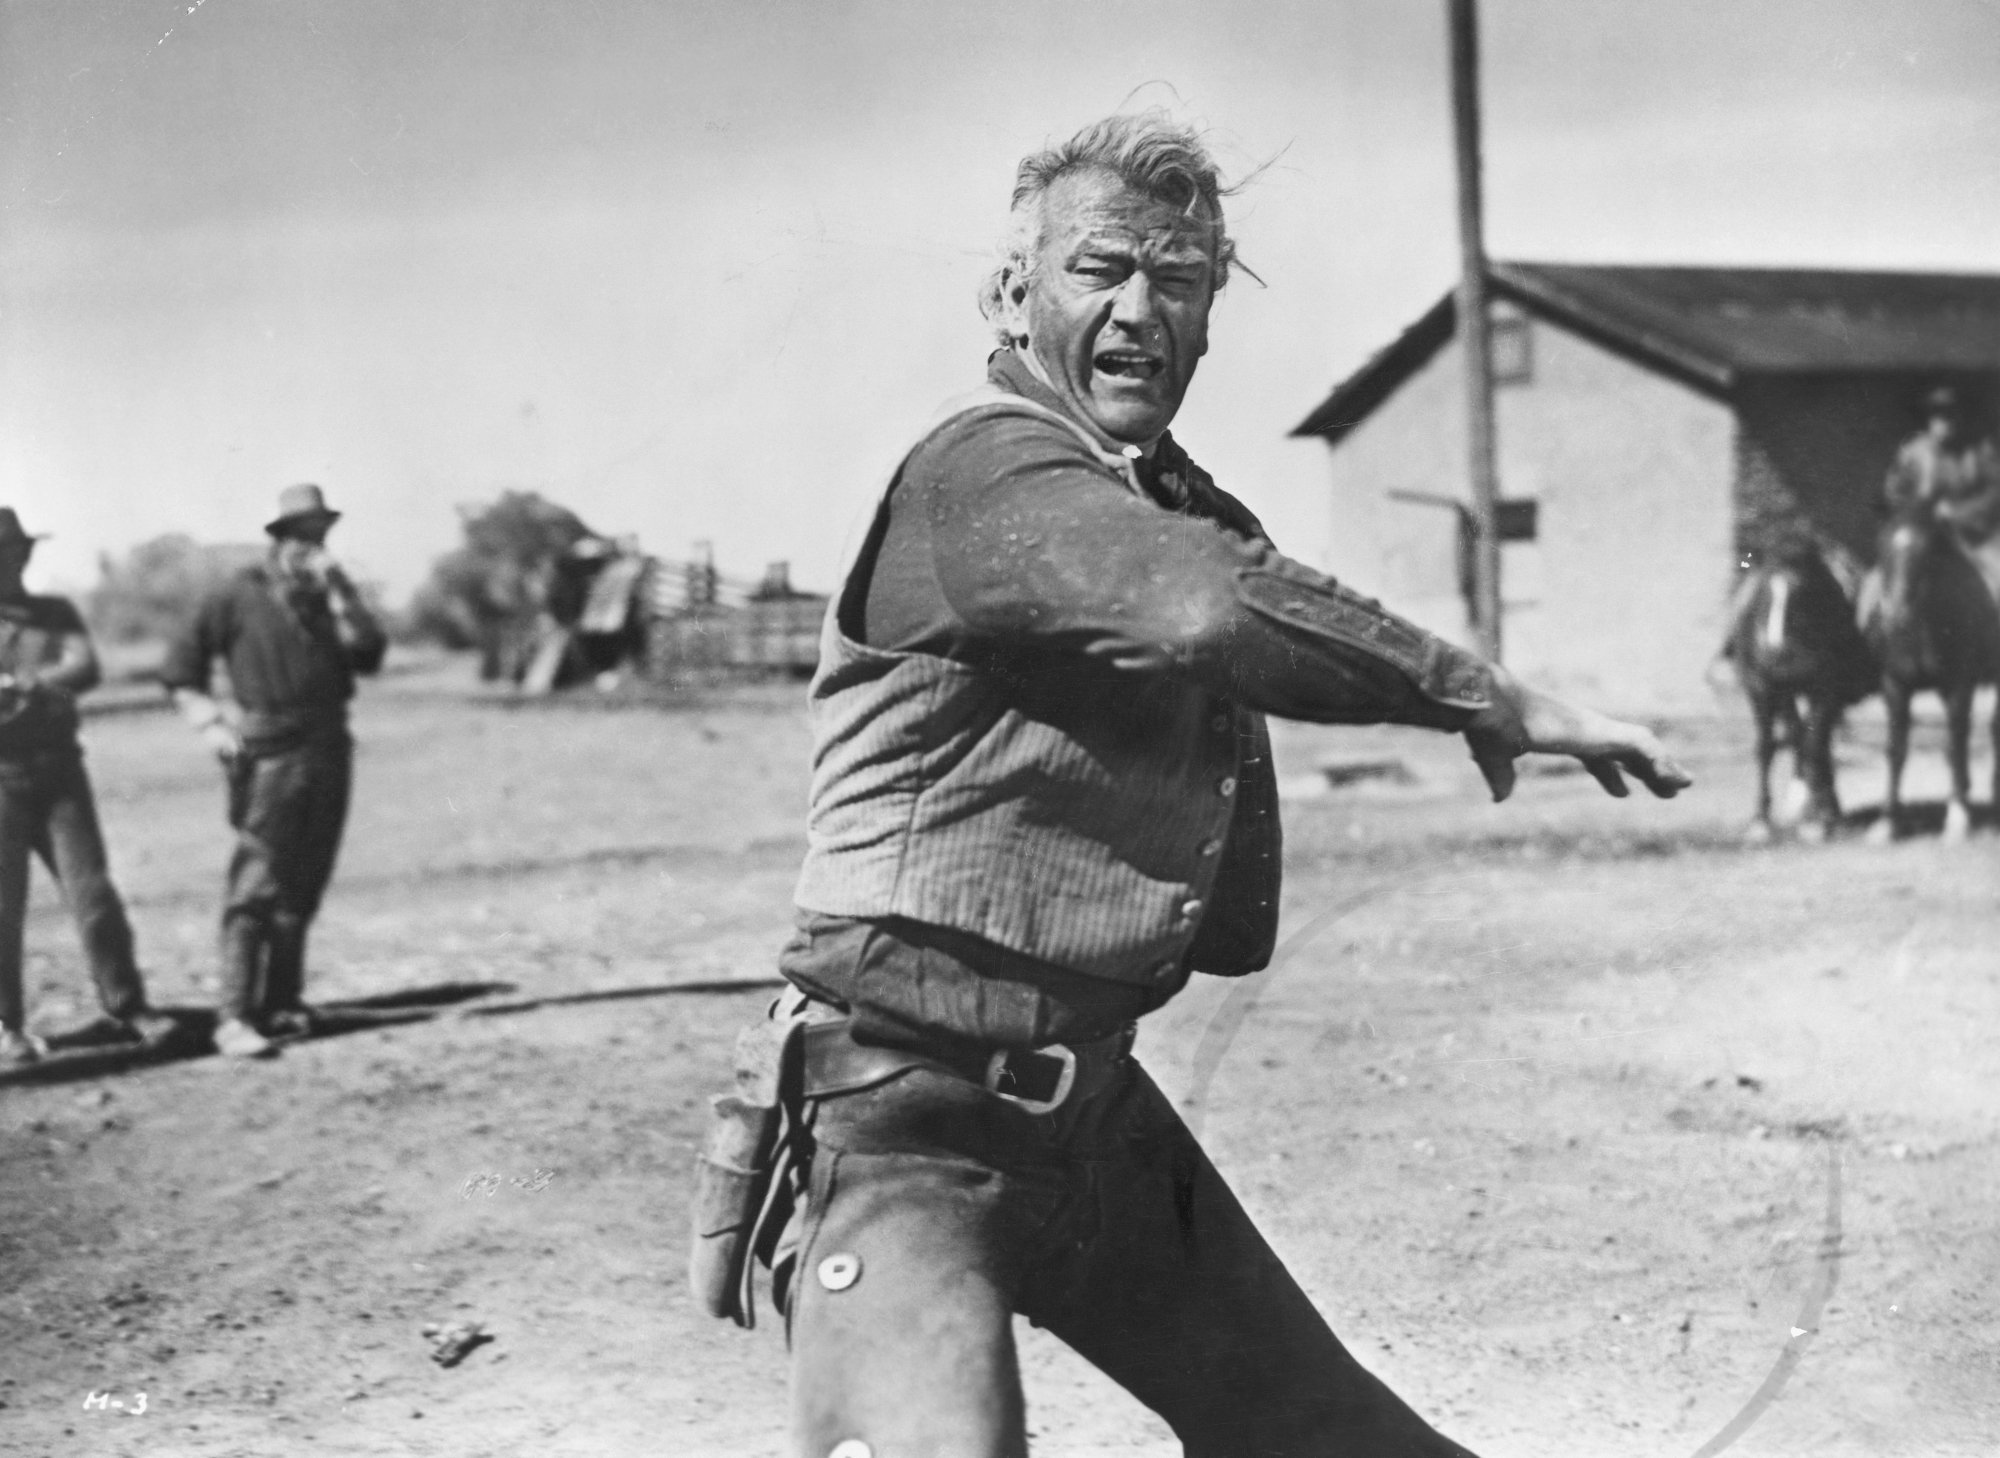 Actor John Wayne who changed Western Hollywood fight scenes shouting